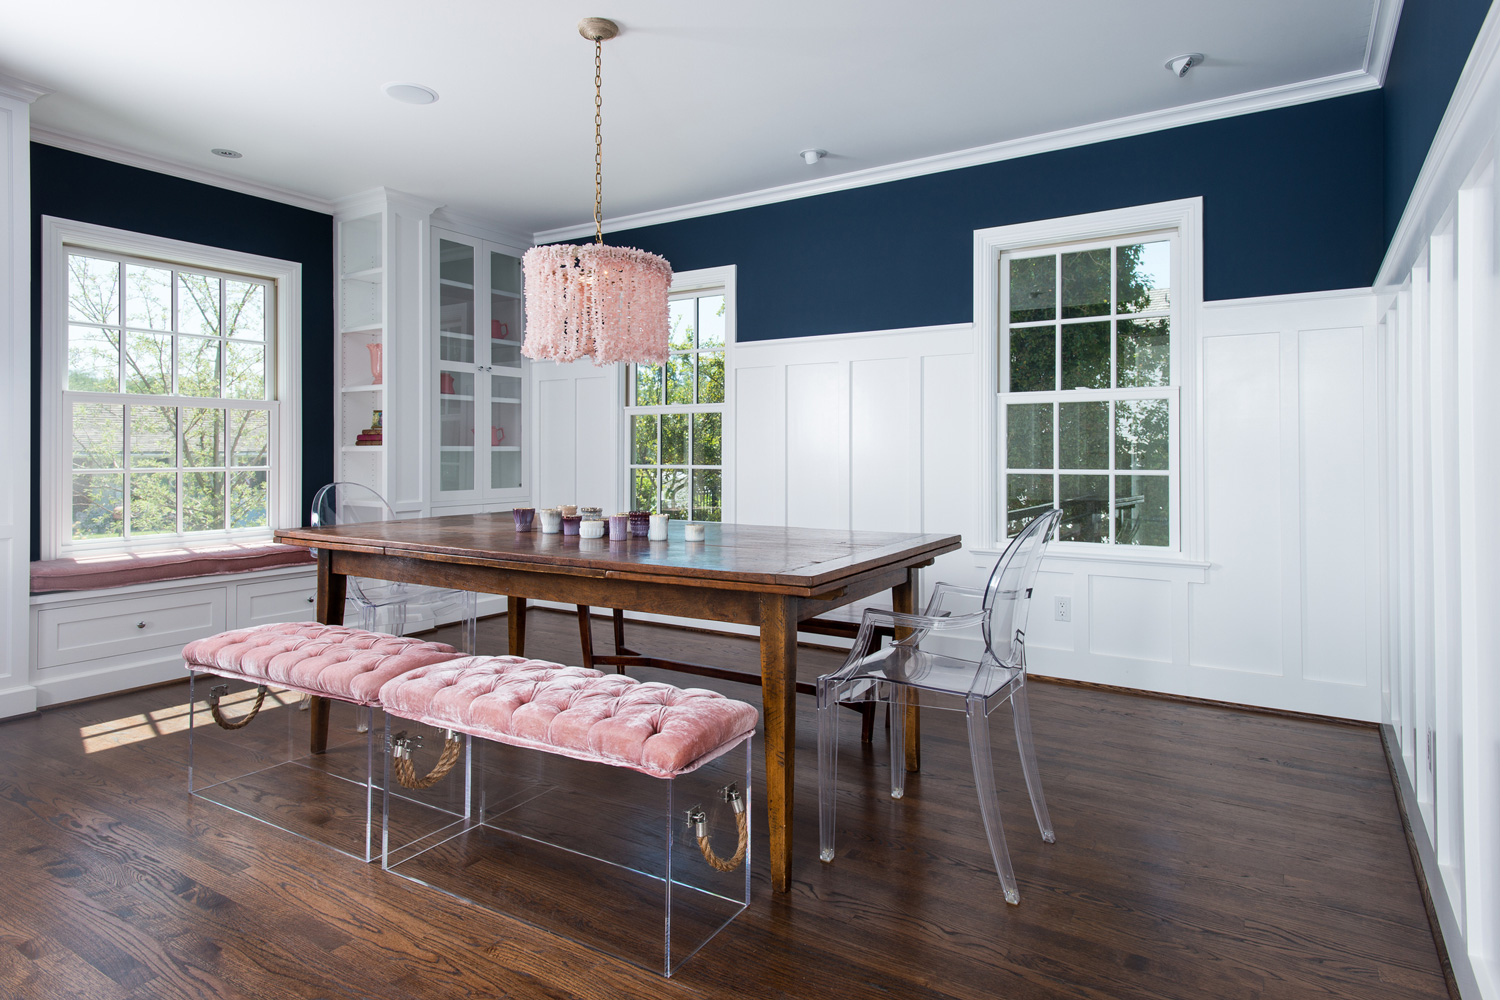 Dining room with distressed country wood table and lucite chairs and bench. The room has hard wood flooring, painted wood wainscoting and cabinets. The upper wall has a dark navy flat paint and the ceiling has adjustable recessed lights.